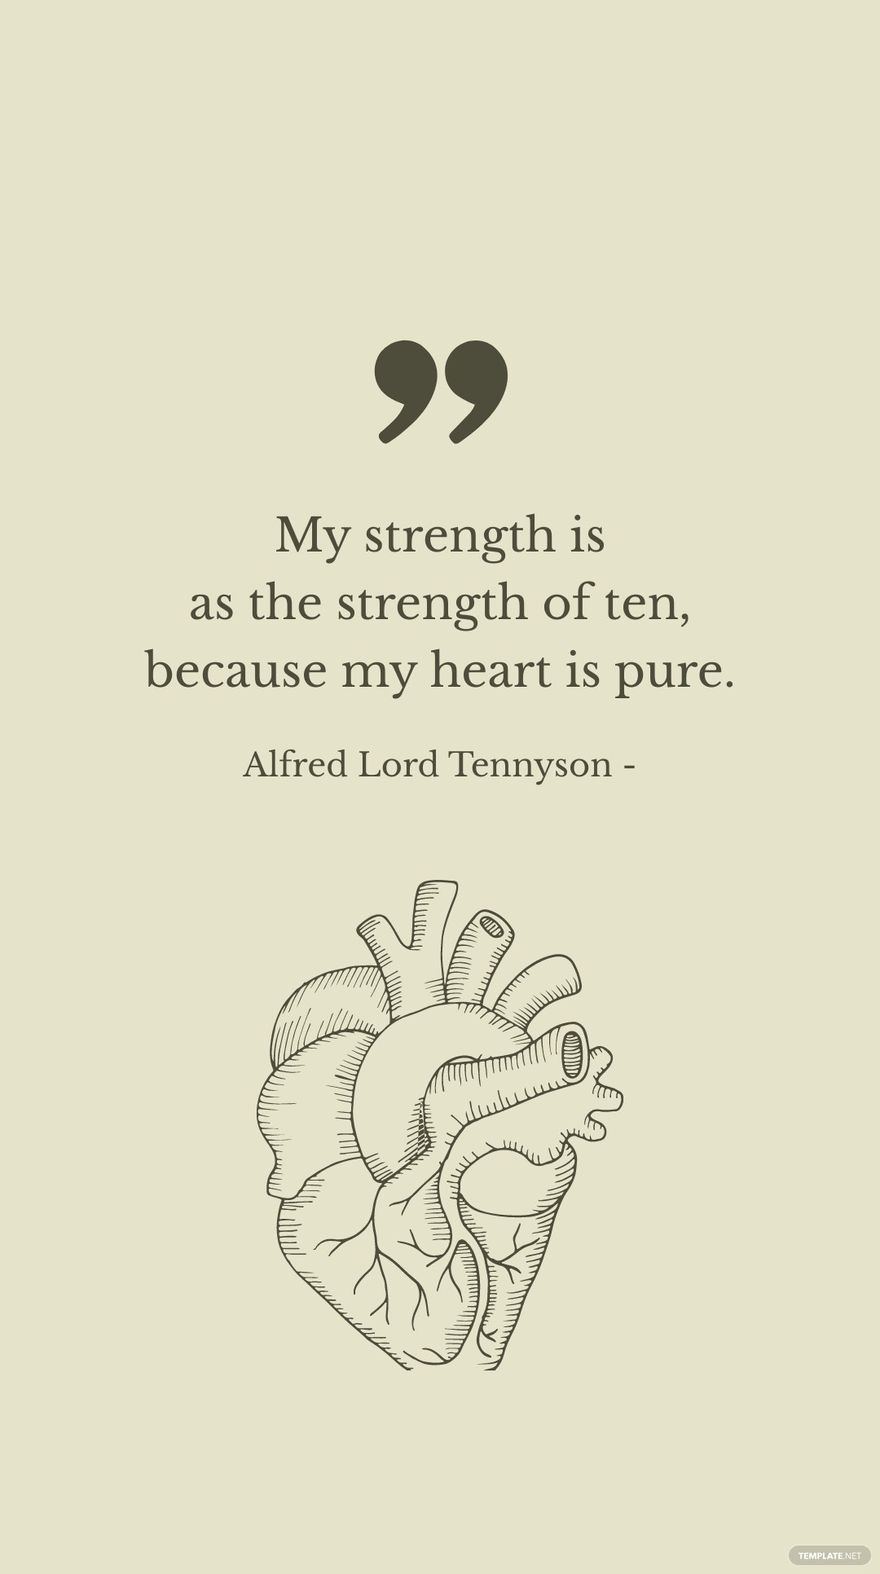 Free Alfred Lord Tennyson - My strength is as the strength of ten, because my heart is pure. in JPG